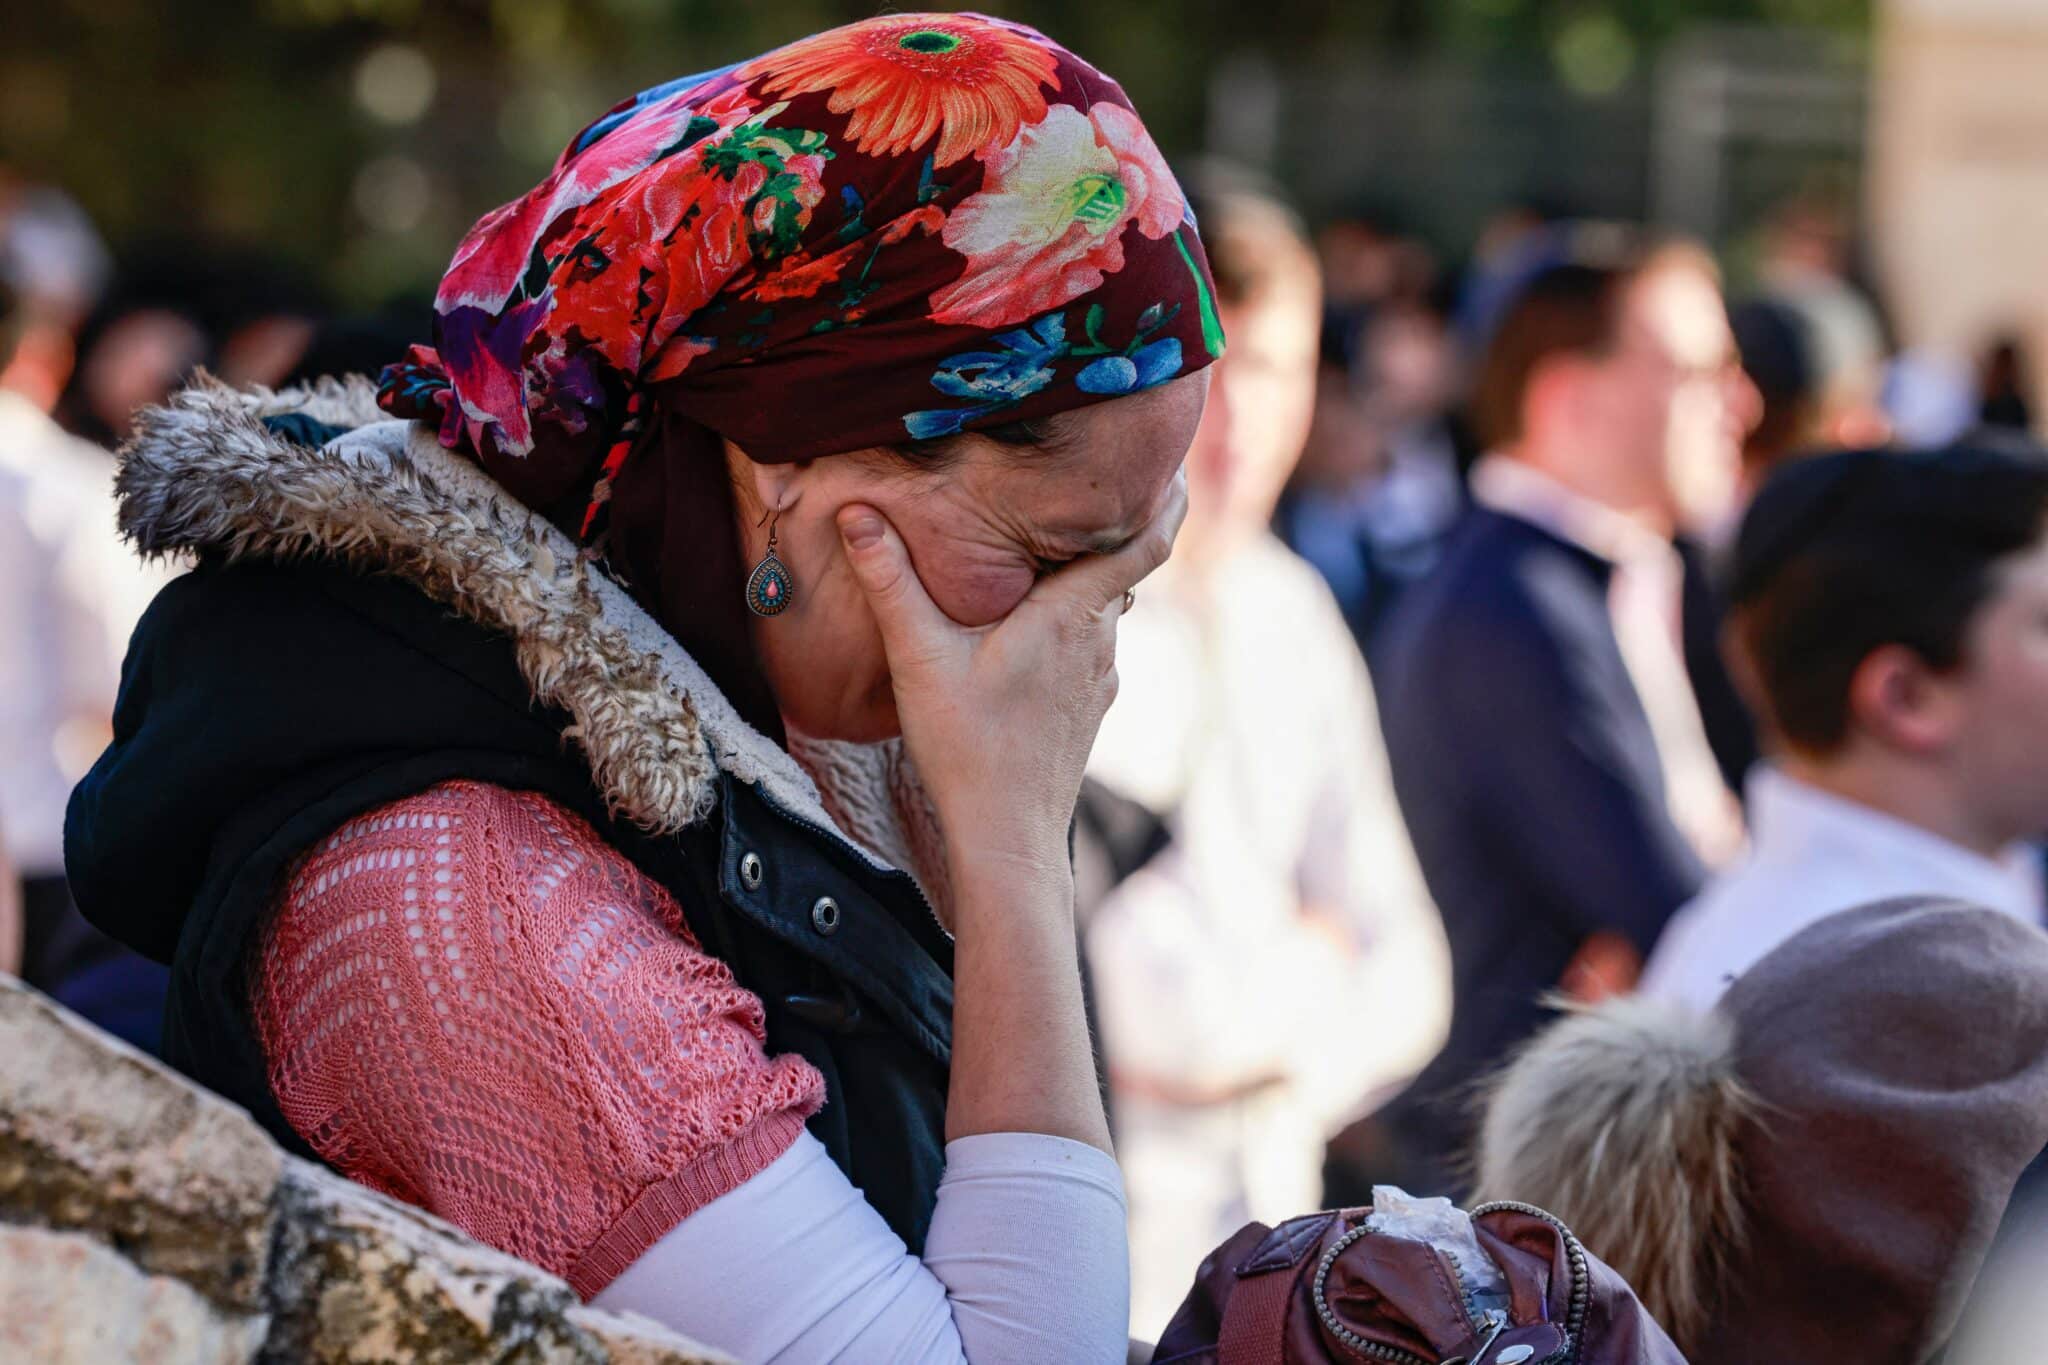 A woman mourner reacts during the funeral of Aryeh Schupak, 15, an Israeli-Canadian killed in an attack on a bus stop in Jerusalem on November 23, 2022. - Explosions hit two bus stops in Jerusalem on November 23, killing a teen and wounding 14, in unclaimed attacks cheered by Palestinian militant group Hamas. The first bombings to hit Jerusalem since 2016, according to security officials, targeted an area frequented by ultra-Orthodox Jews at the western exit from Jerusalem. (Photo by Menahem KAHANA / AFP) (Photo by MENAHEM KAHANA/AFP via Getty Images)